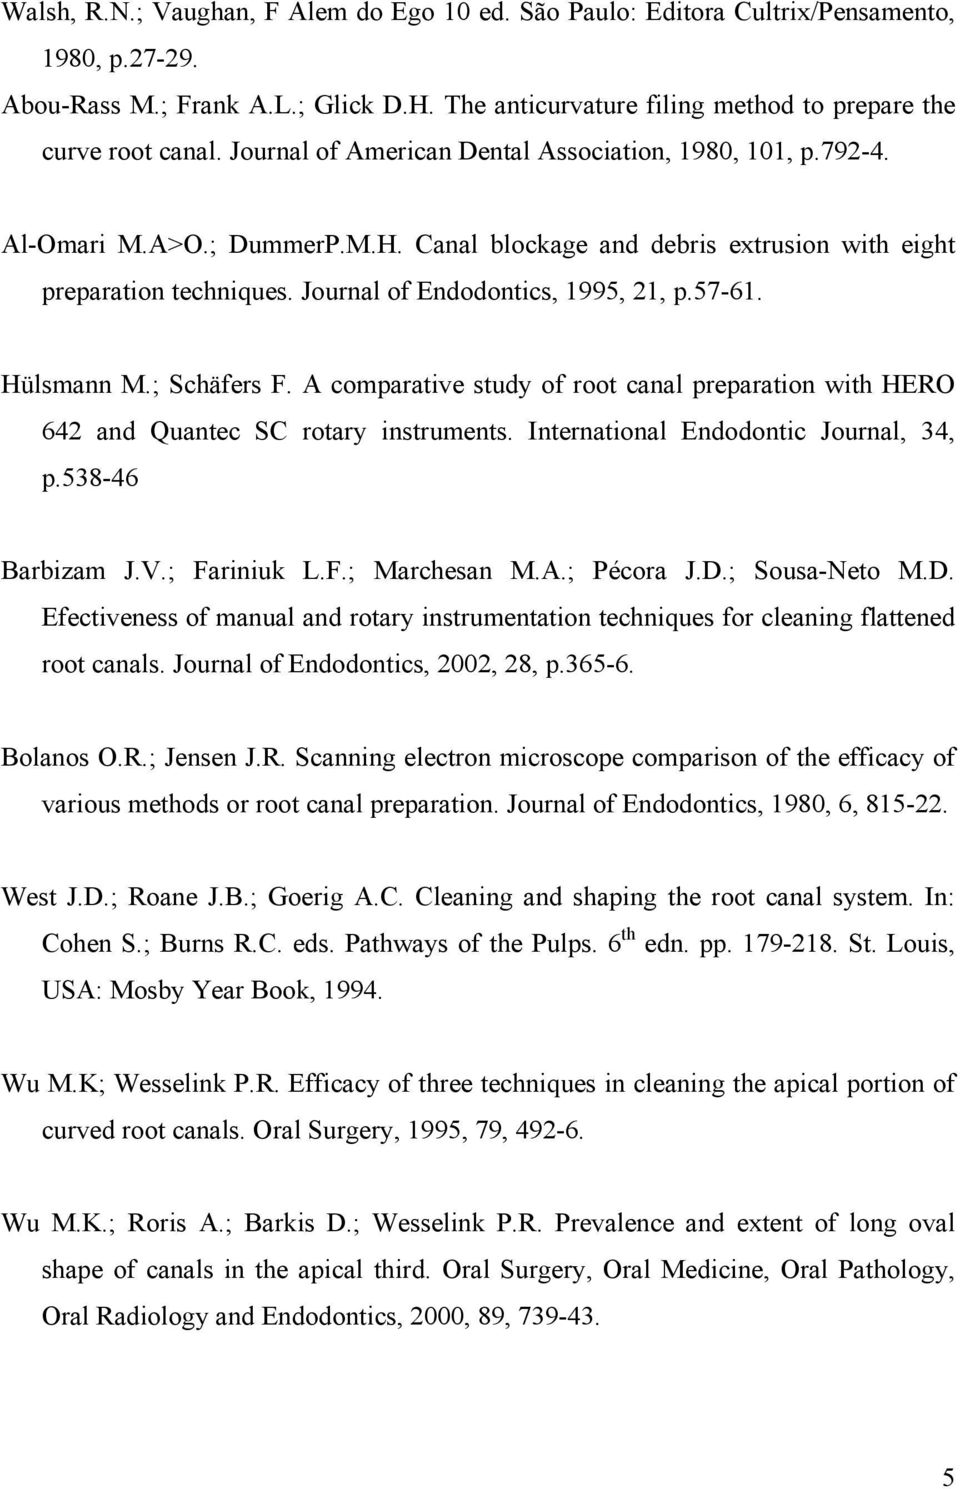 57-61. Hülsmann M.; Schäfers F. A comparative study of root canal preparation with HERO 642 and Quantec SC rotary instruments. International Endodontic Journal, 34, p.538-46 Barbizam J.V.; Fariniuk L.